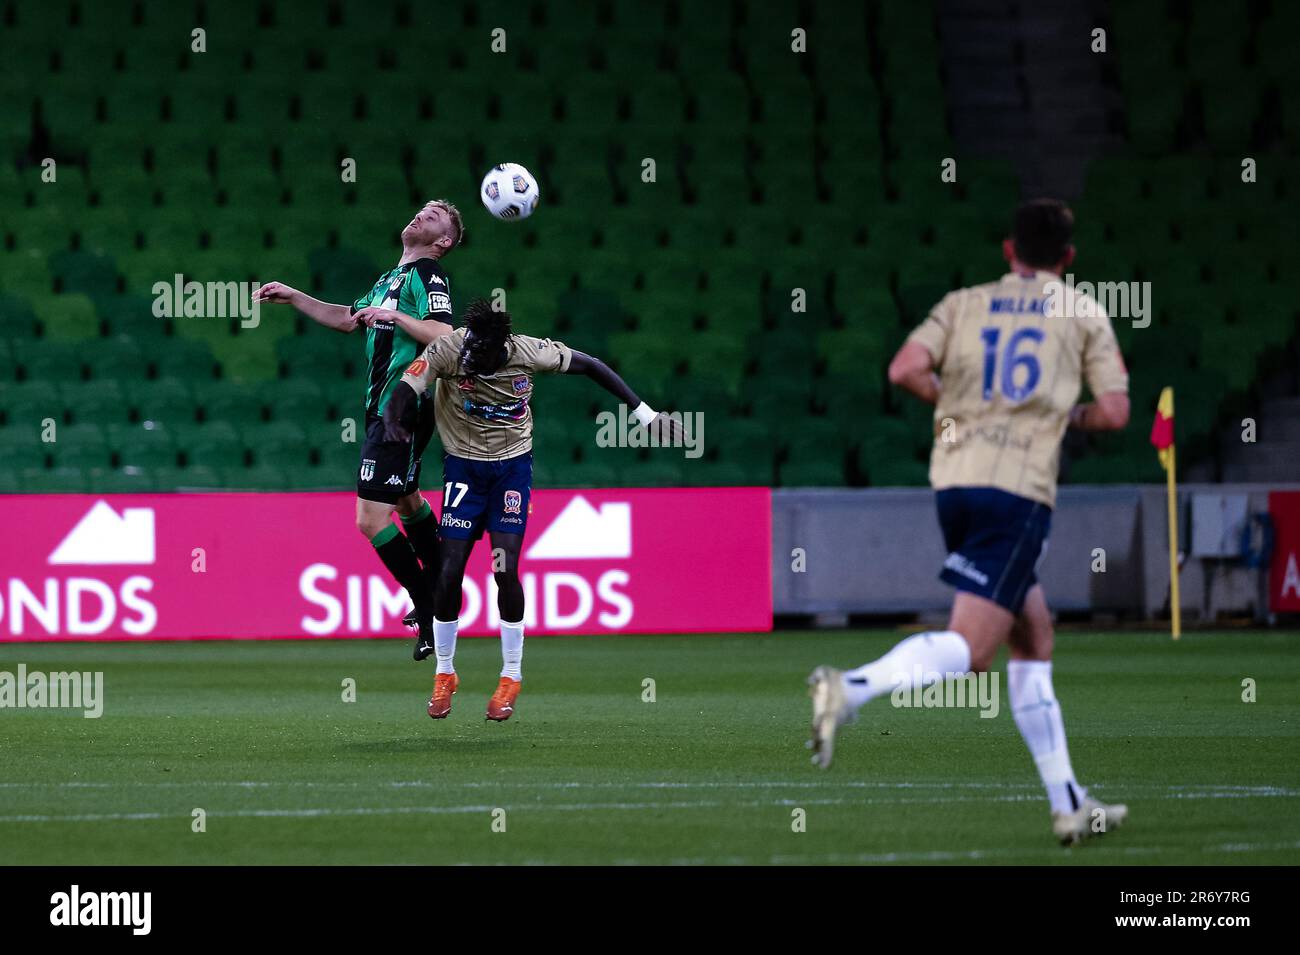 MELBOURNE, AUSTRALIA - APRIL 26: Connor Pain of Western United heads the ball ahead of Valentino Yuel of Newcastle Jets during the Hyundai A-League soccer match between Western United FC and Newcastle Jets on April, 26, 2021 at AAMI Park in Melbourne, Australia. Stock Photo